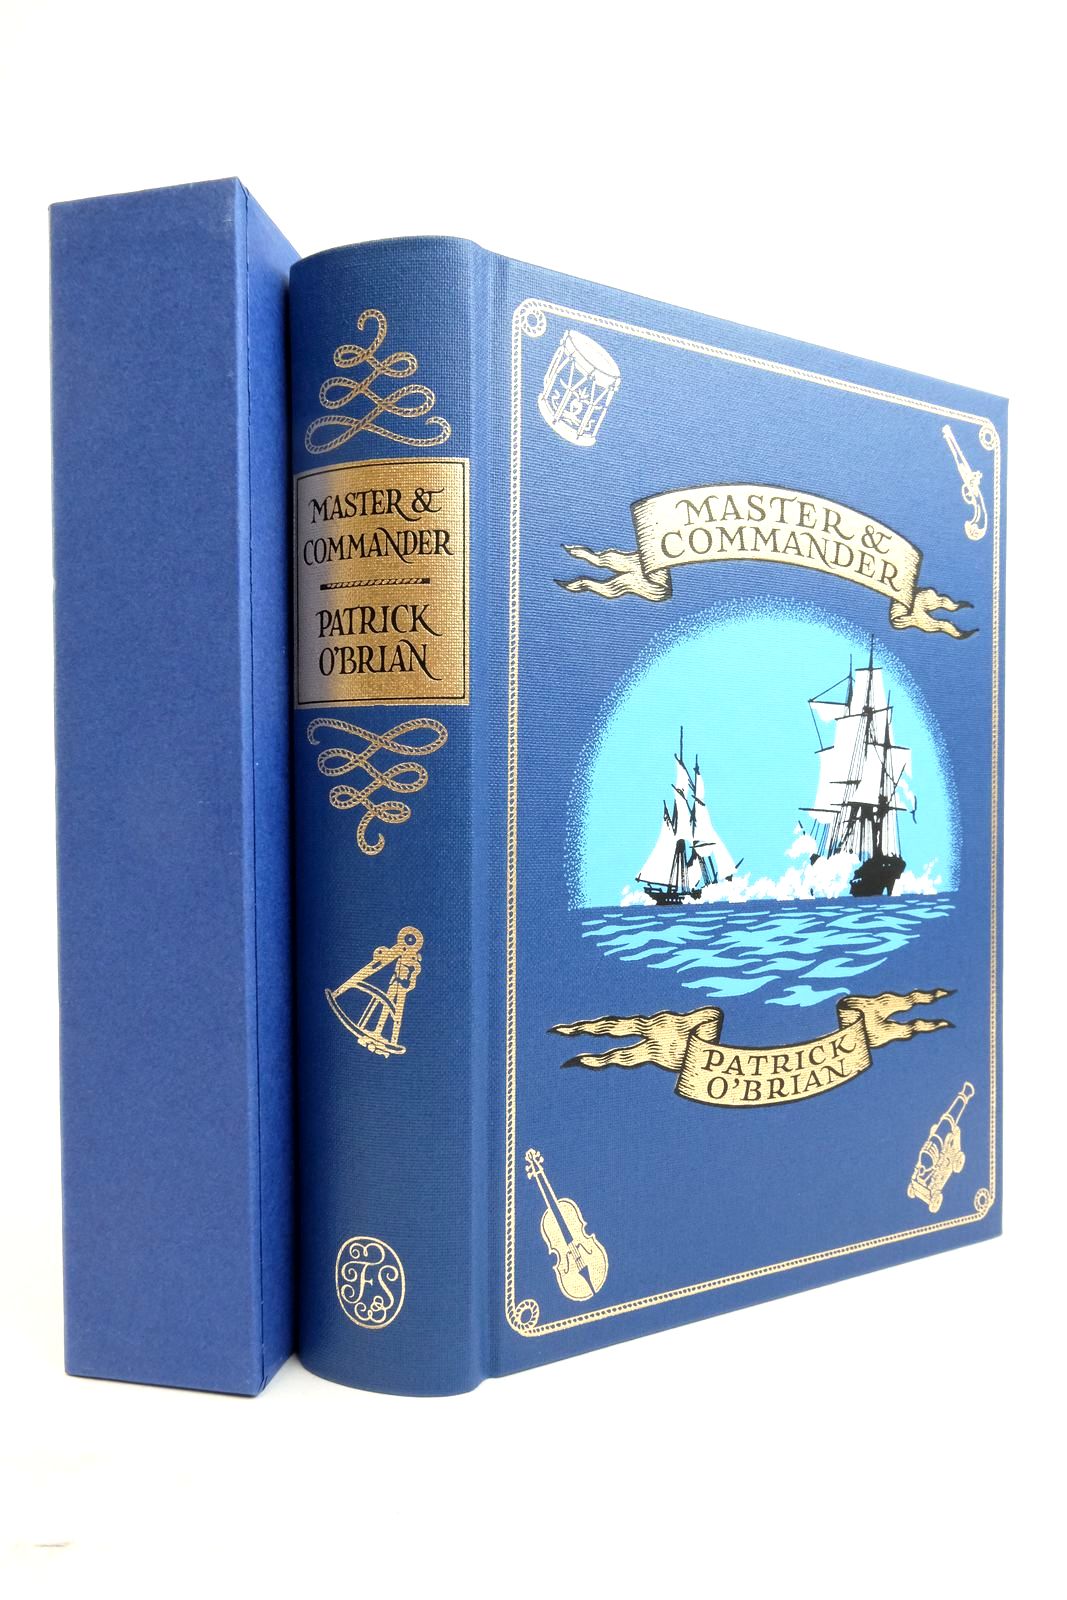 Photo of MASTER & COMMANDER written by O'Brian, Patrick published by Folio Society (STOCK CODE: 2136561)  for sale by Stella & Rose's Books